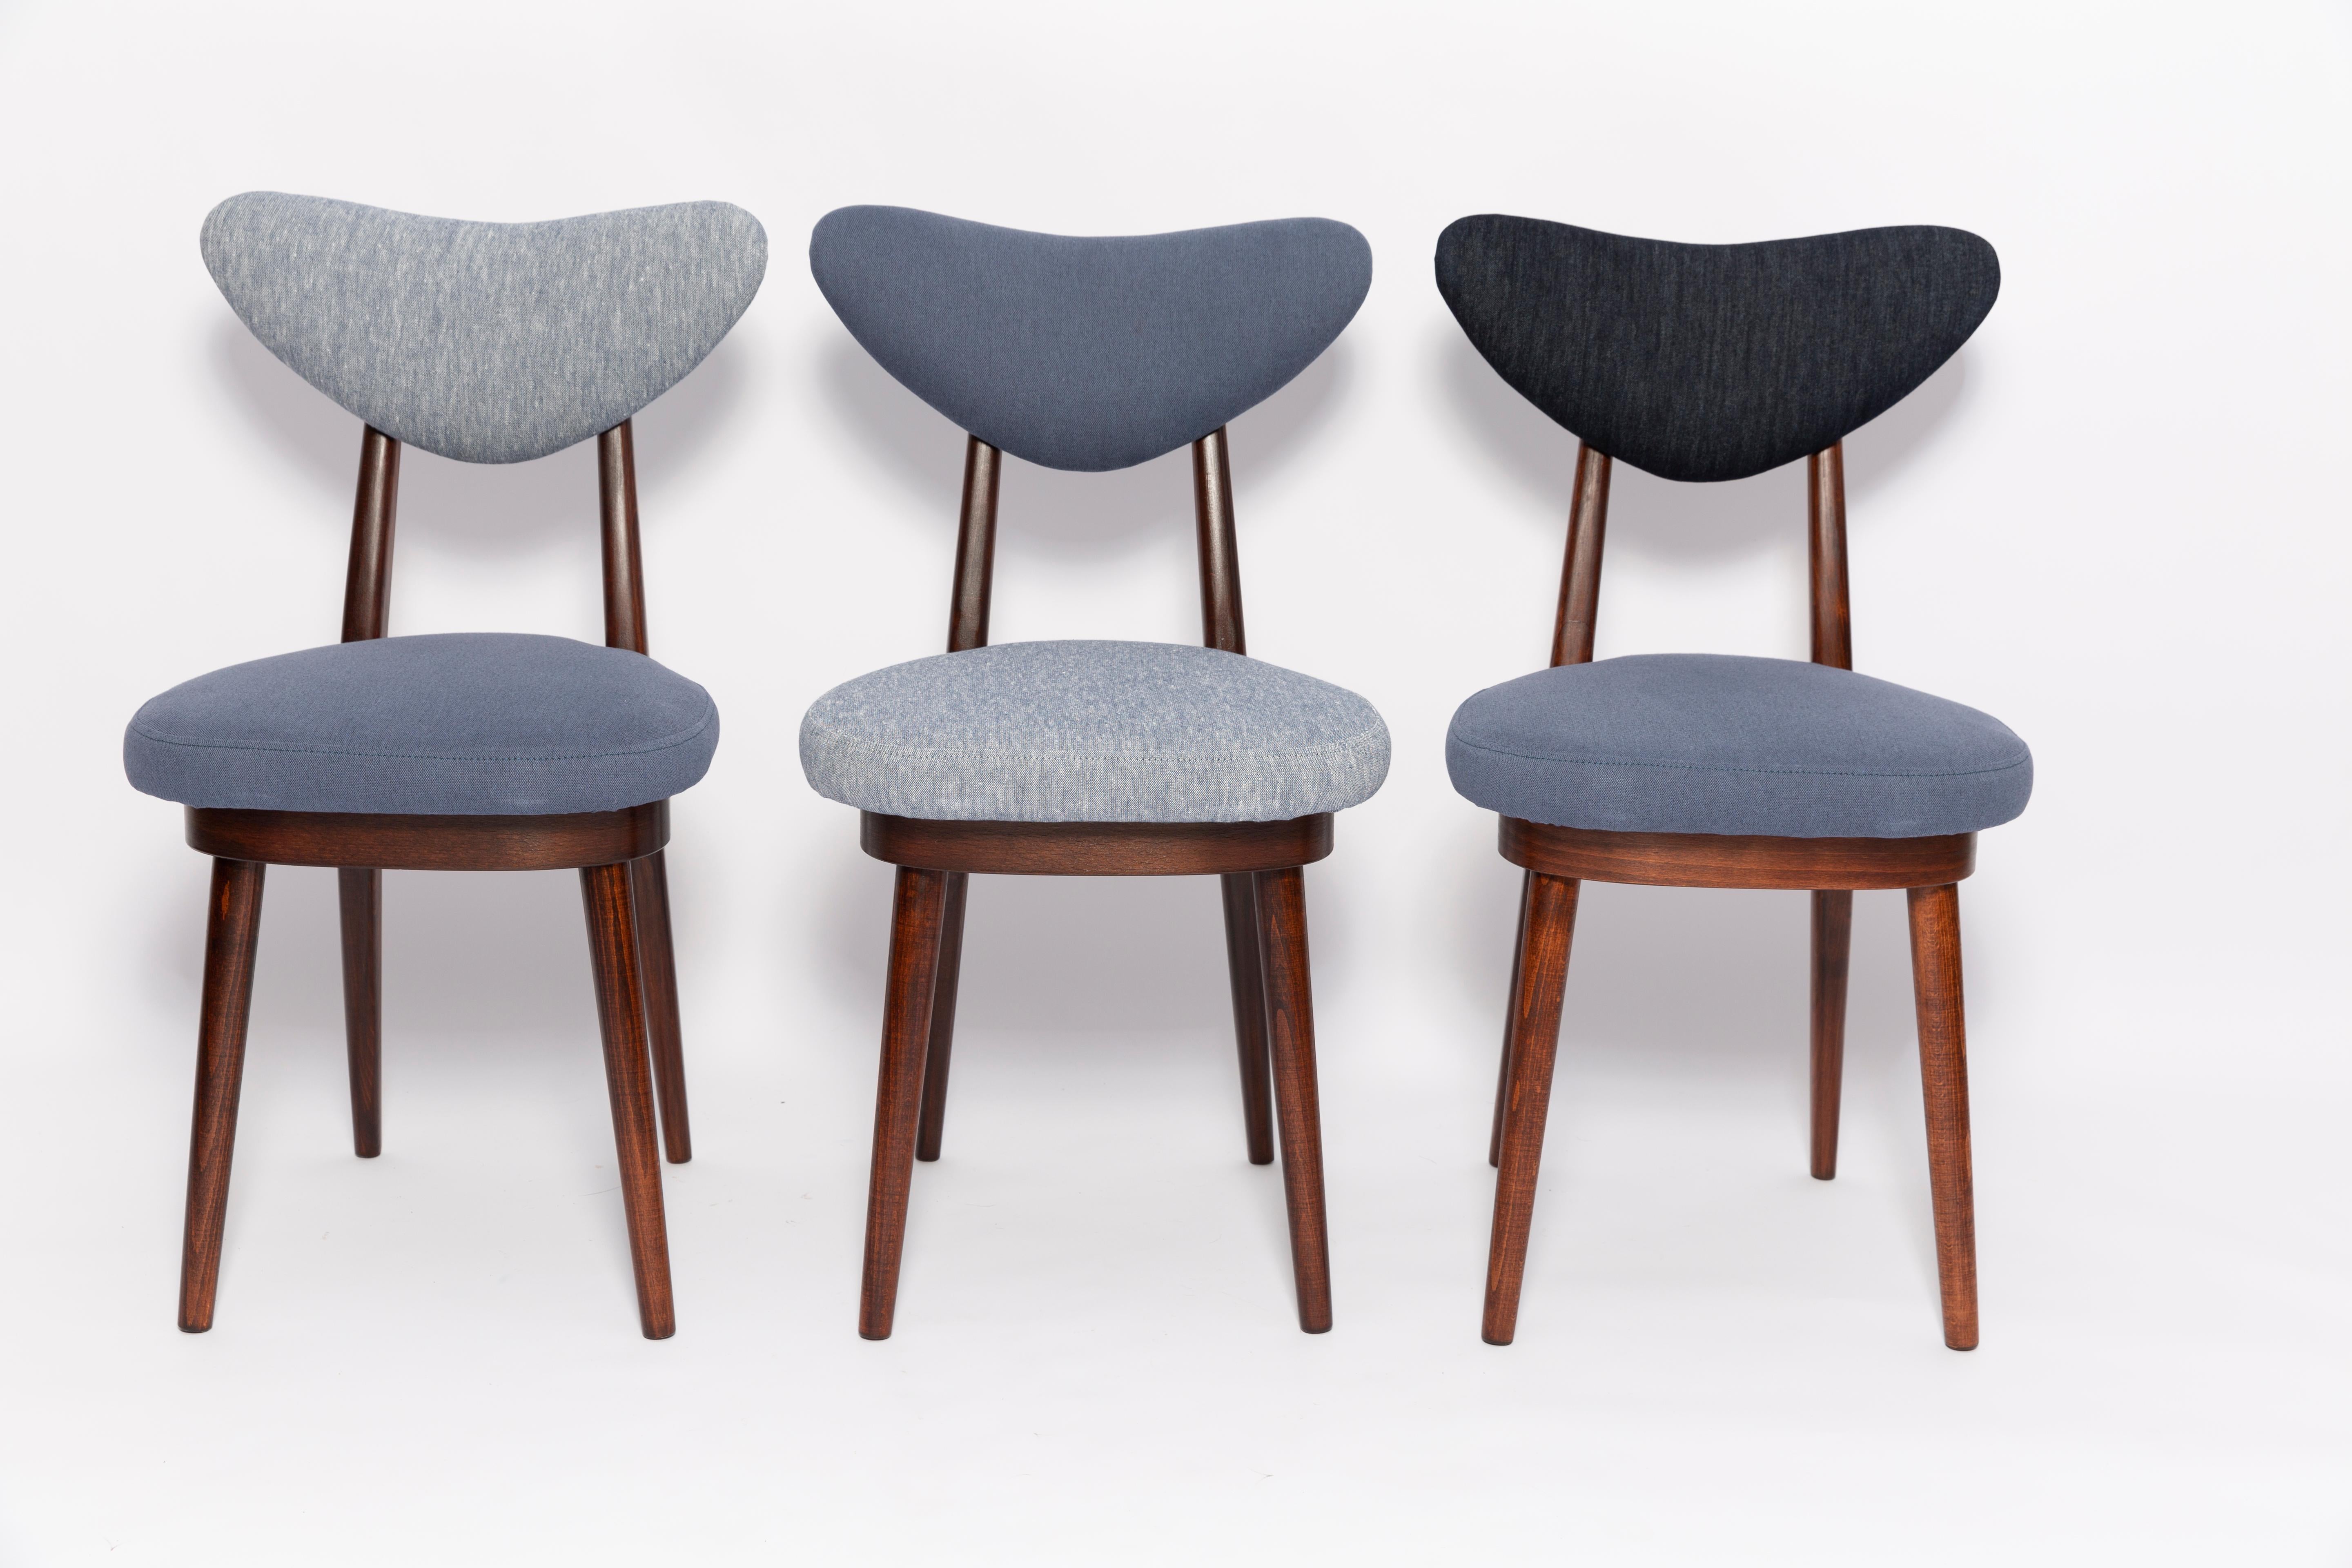 Set of Four Midcentury Light and Medium Blue Denim Heart Chairs, Europe, 1960s For Sale 4